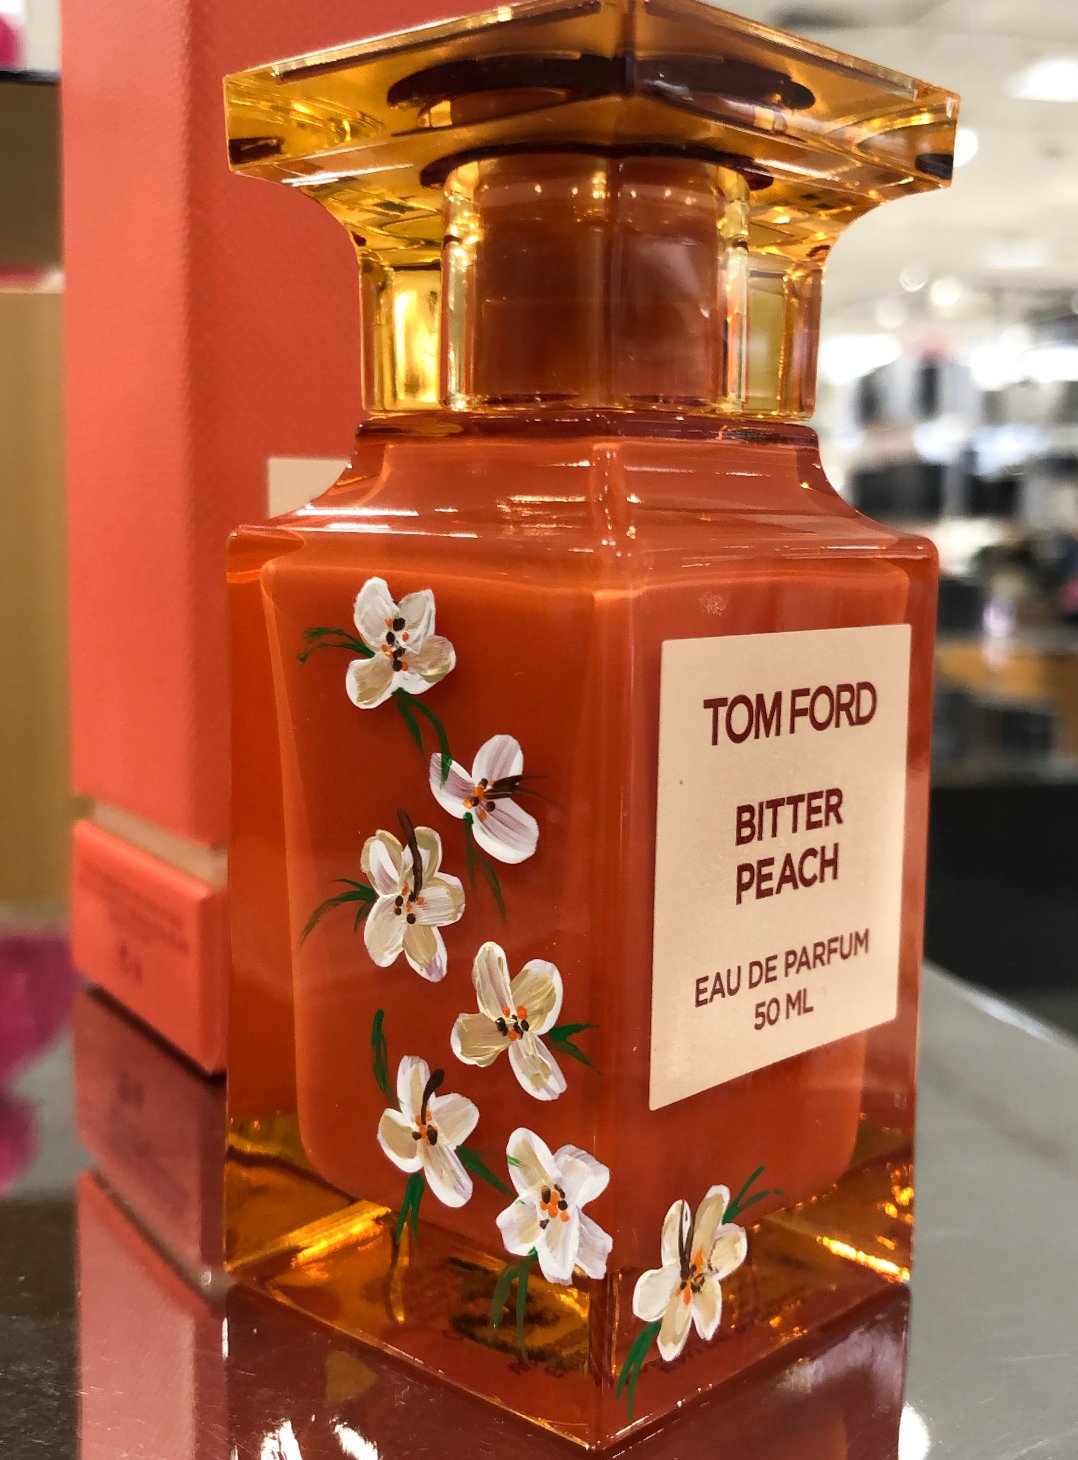 Bottle Painting Event for Tom Ford